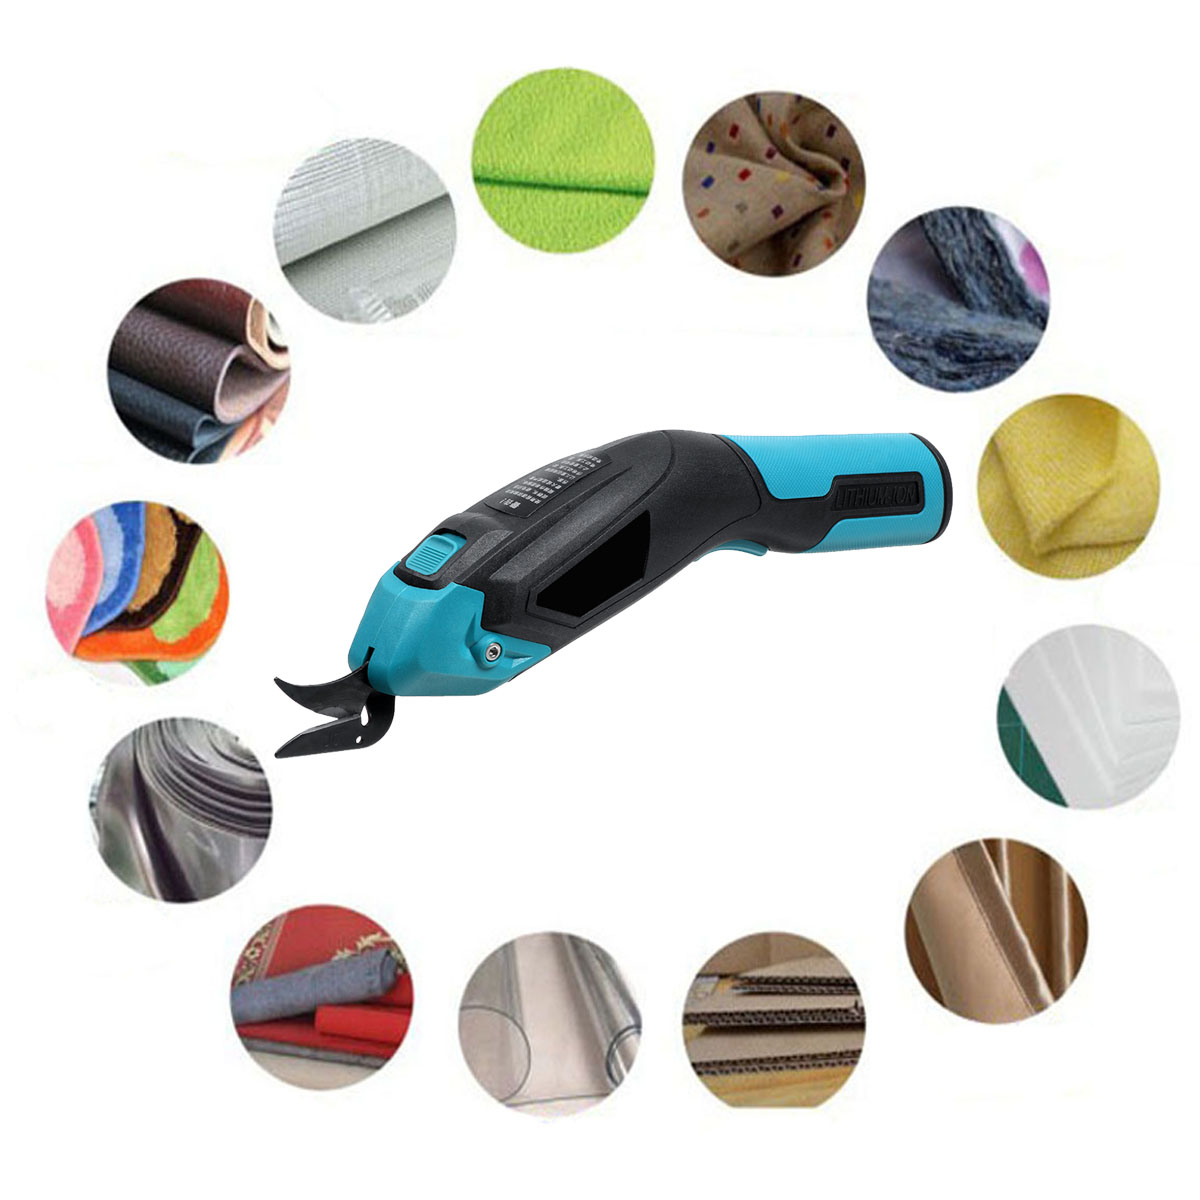 DC-4V-Portable-Cordless-Electric-Scissors-Leather-Fabric-Crafts-Cutter-Cutting-Tool-1733406-5